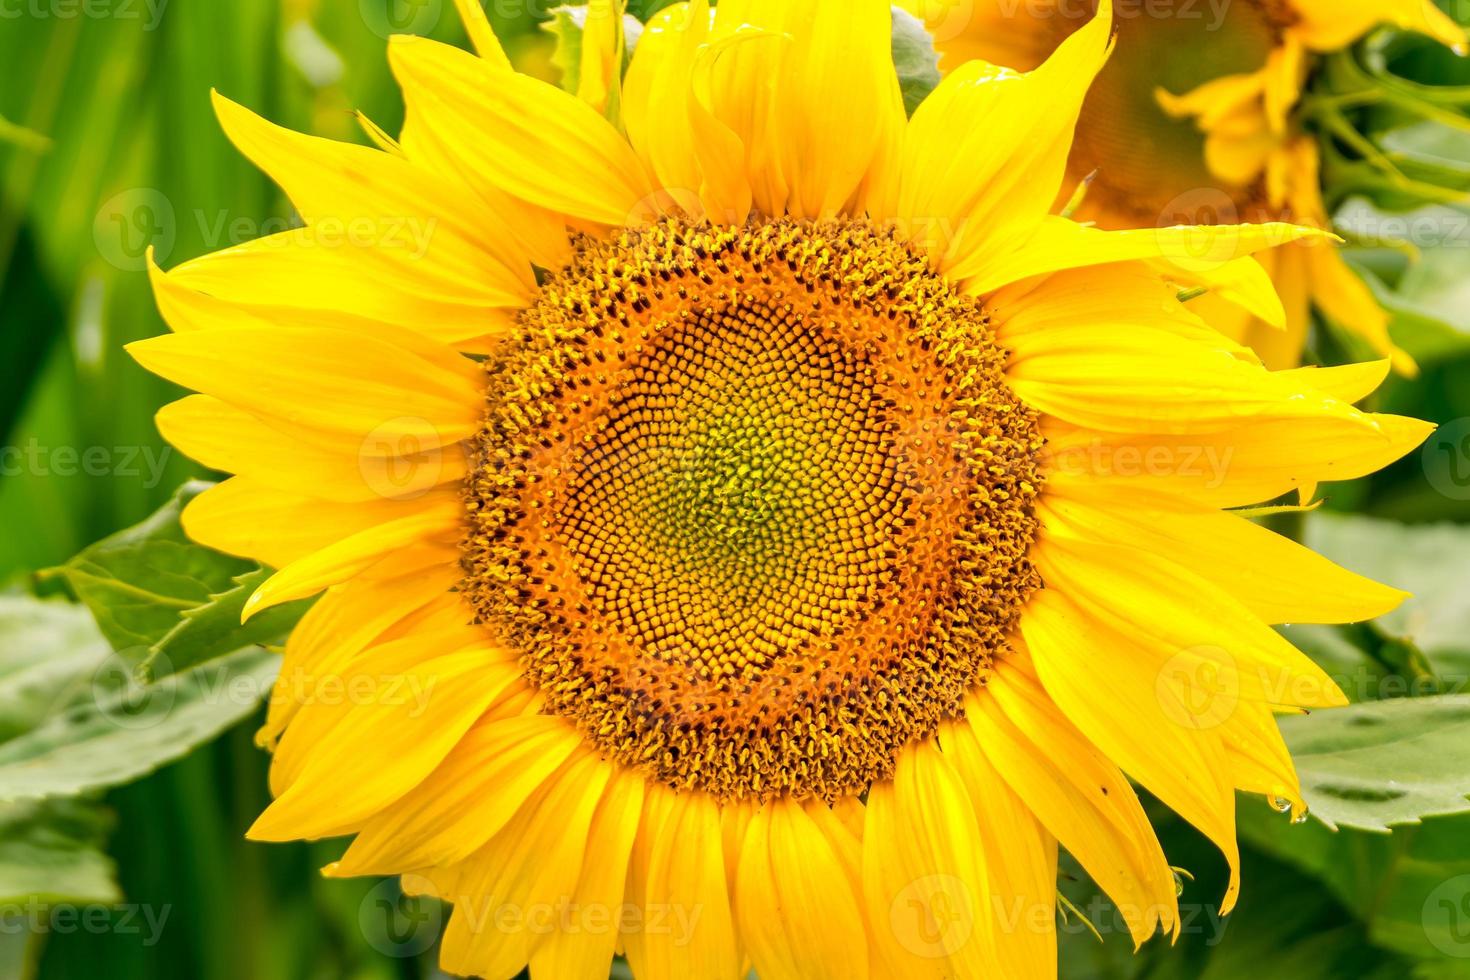 Bright yellow sunflowers in full bloom  in garden for oil improves skin health and promote cell regeneration photo